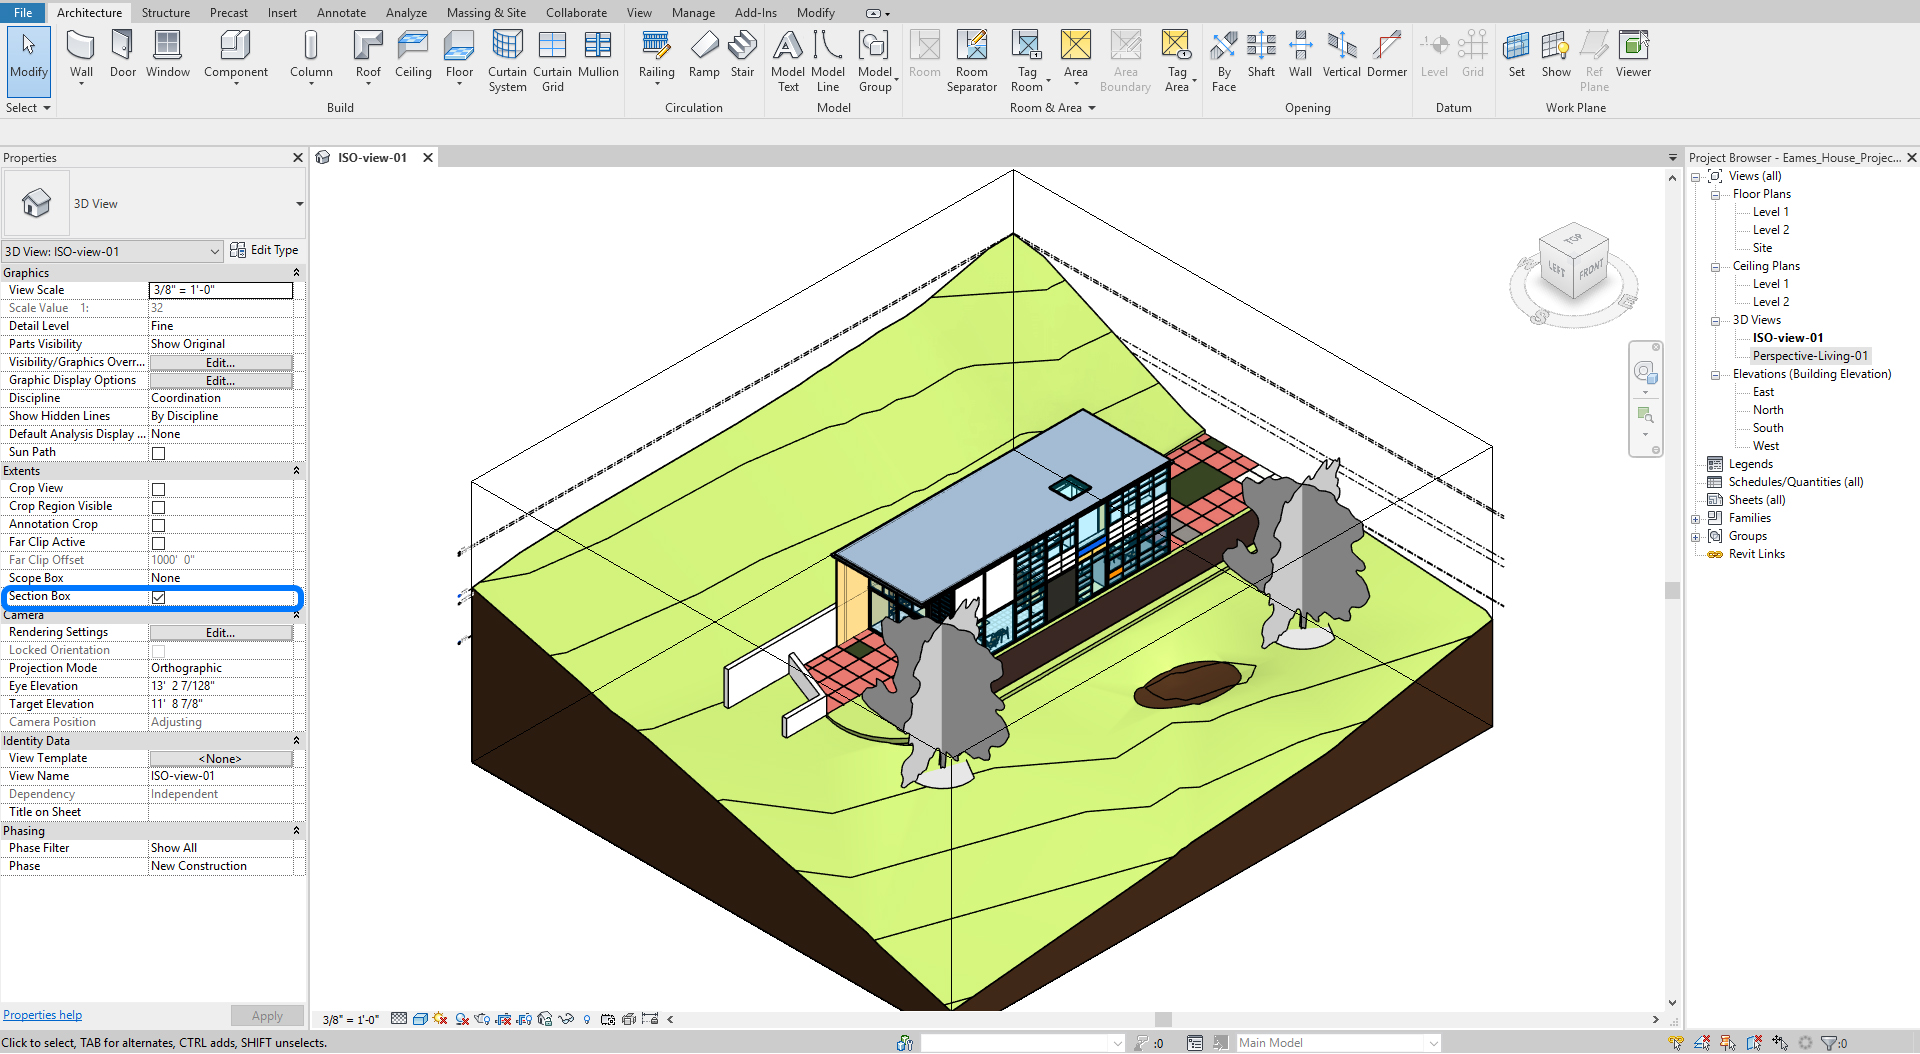 It indicates how to set the Revit model for exterior rendering. The section box tool is used for defining the boundary of the 3D model.